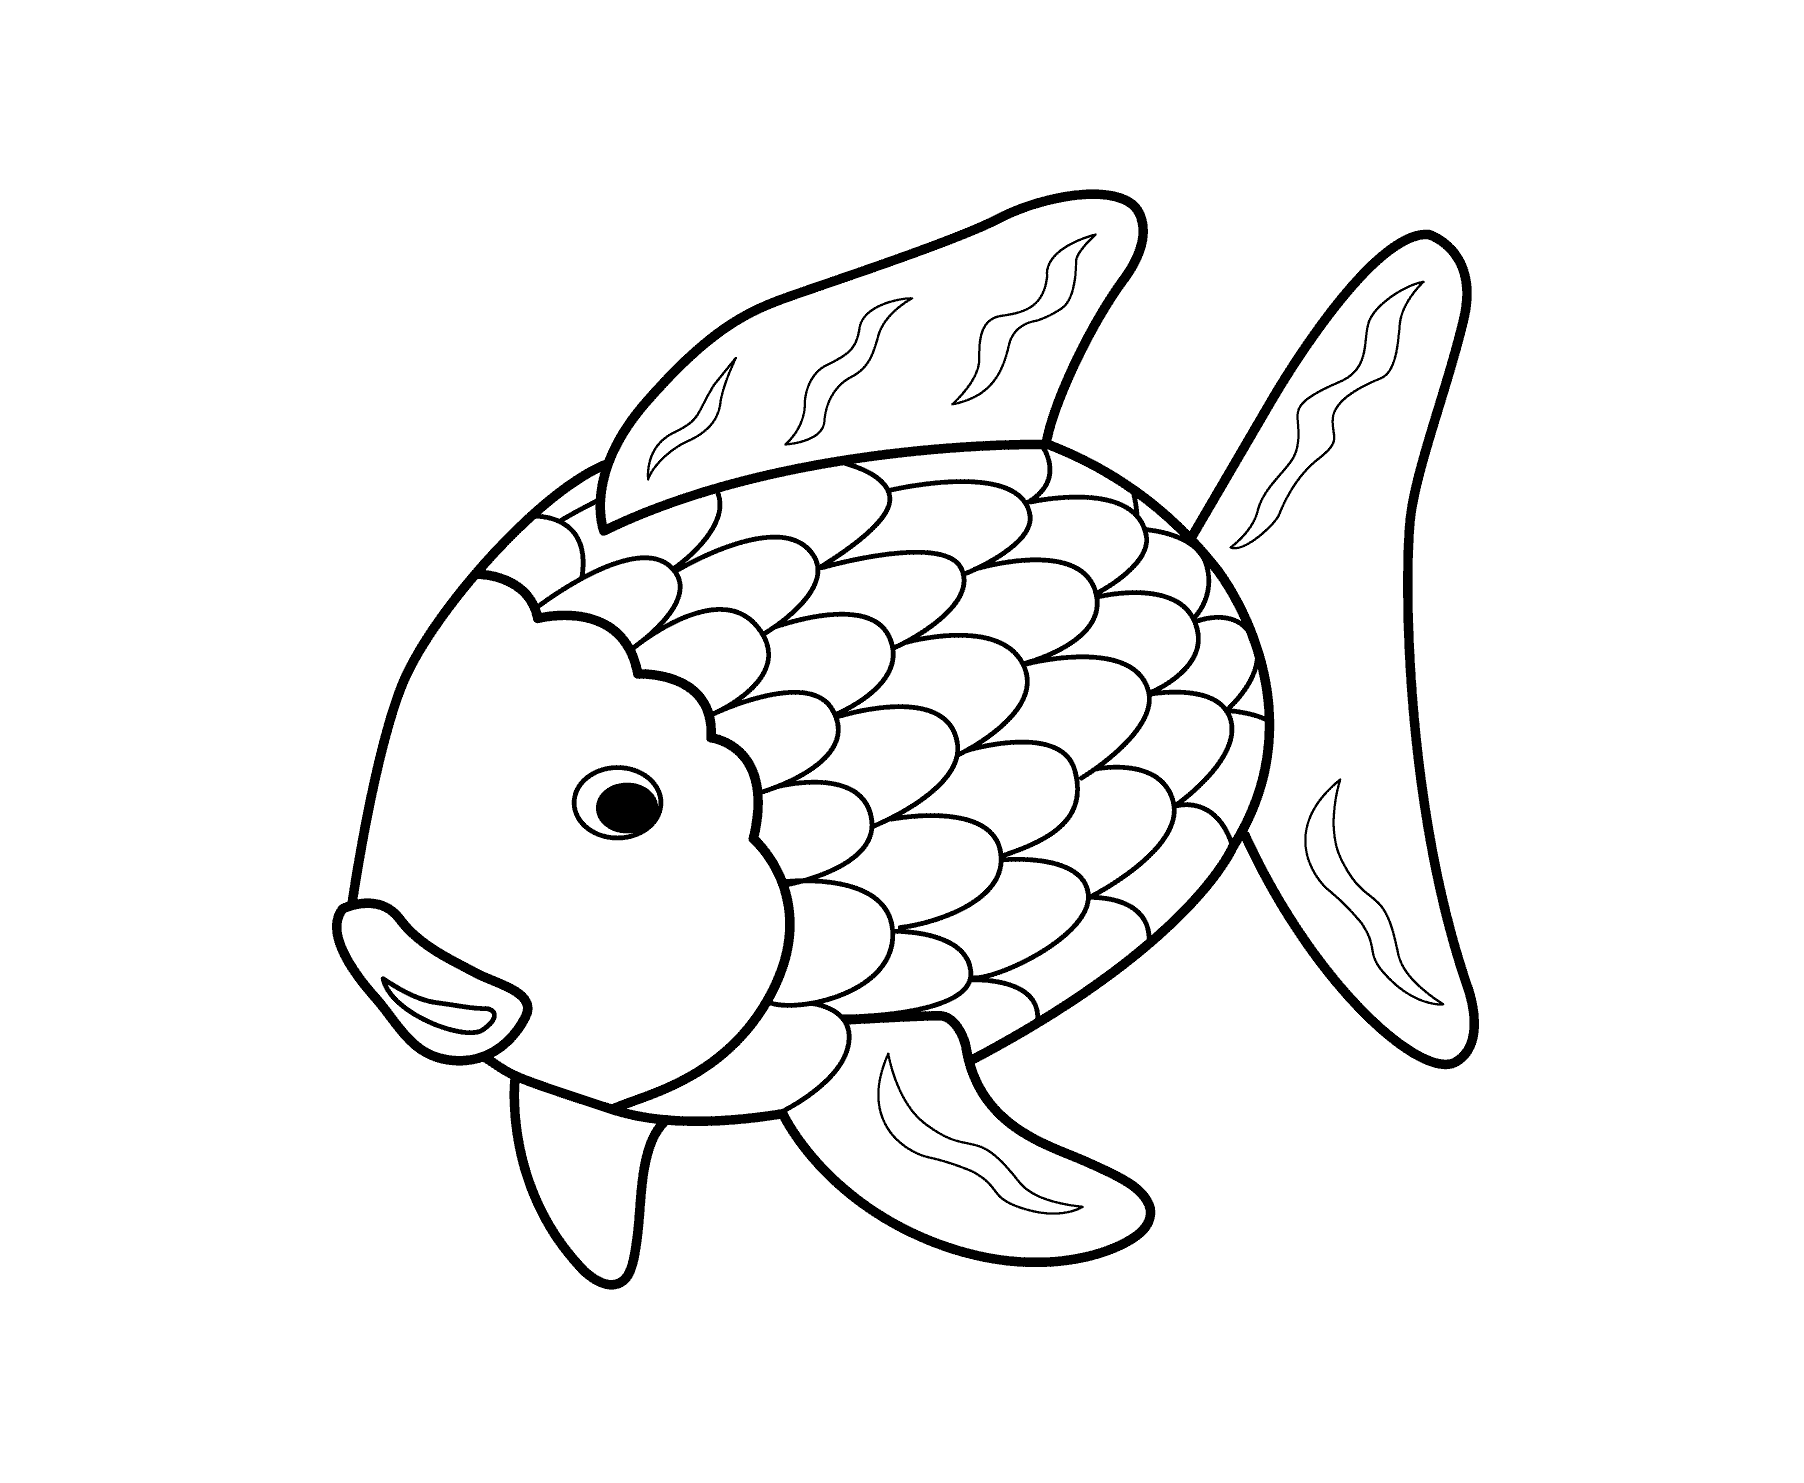 fish color page sea fish coloring pages download and print for free page color fish 